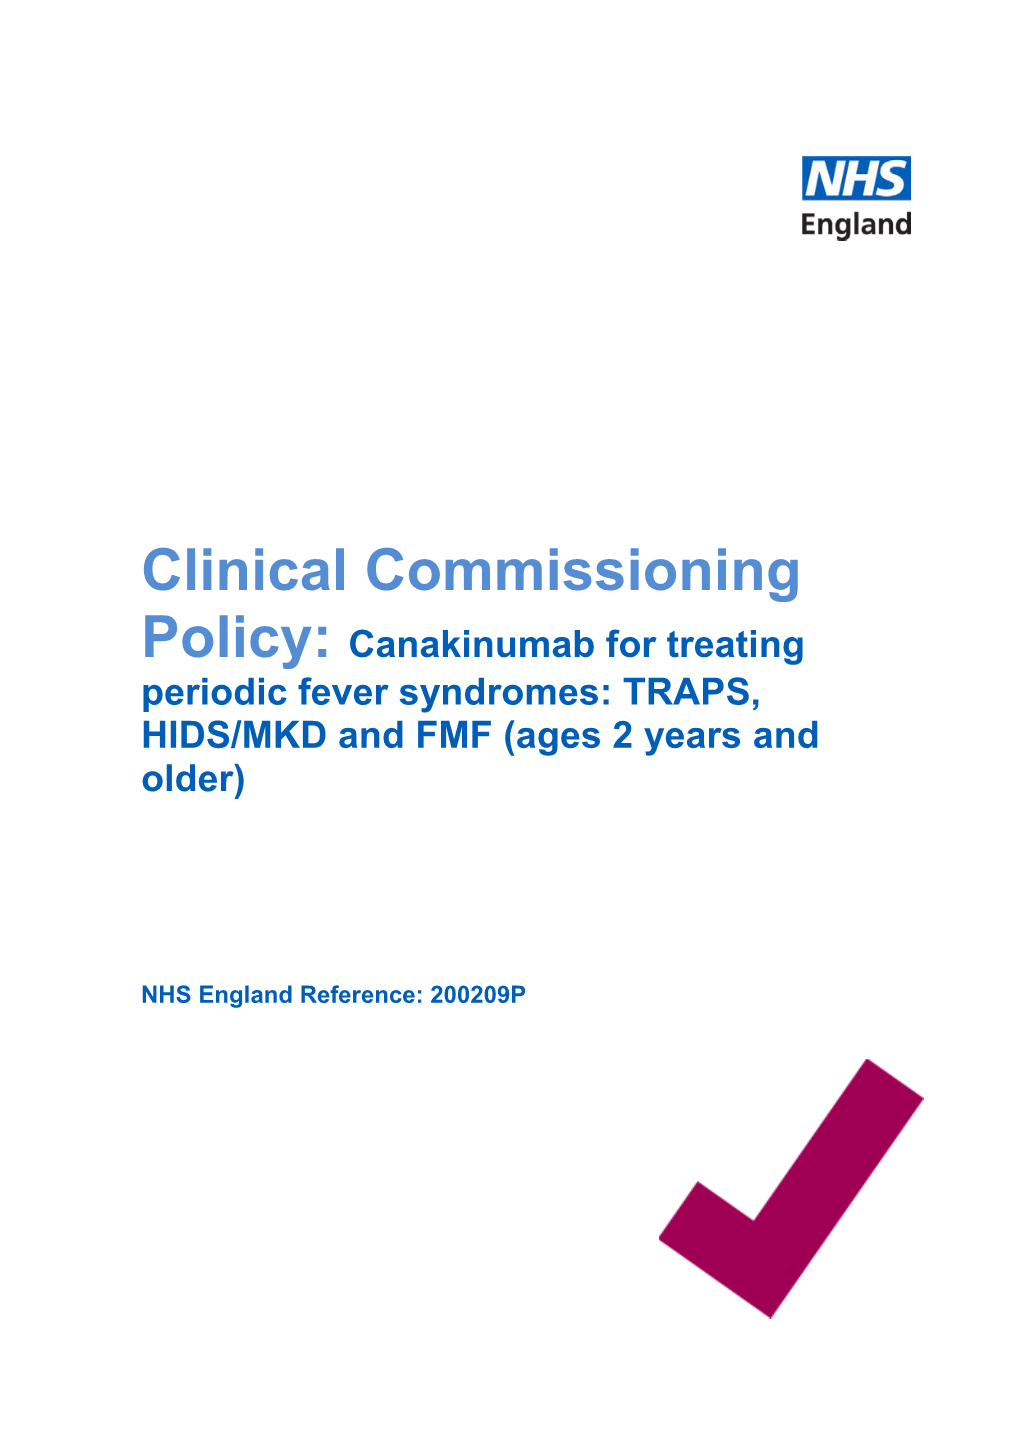 Clinical Commissioning Policy: Canakinumab for Treating Periodic Fever Syndromes: TRAPS, HIDS/MKD and FMF (Ages 2 Years and Older)